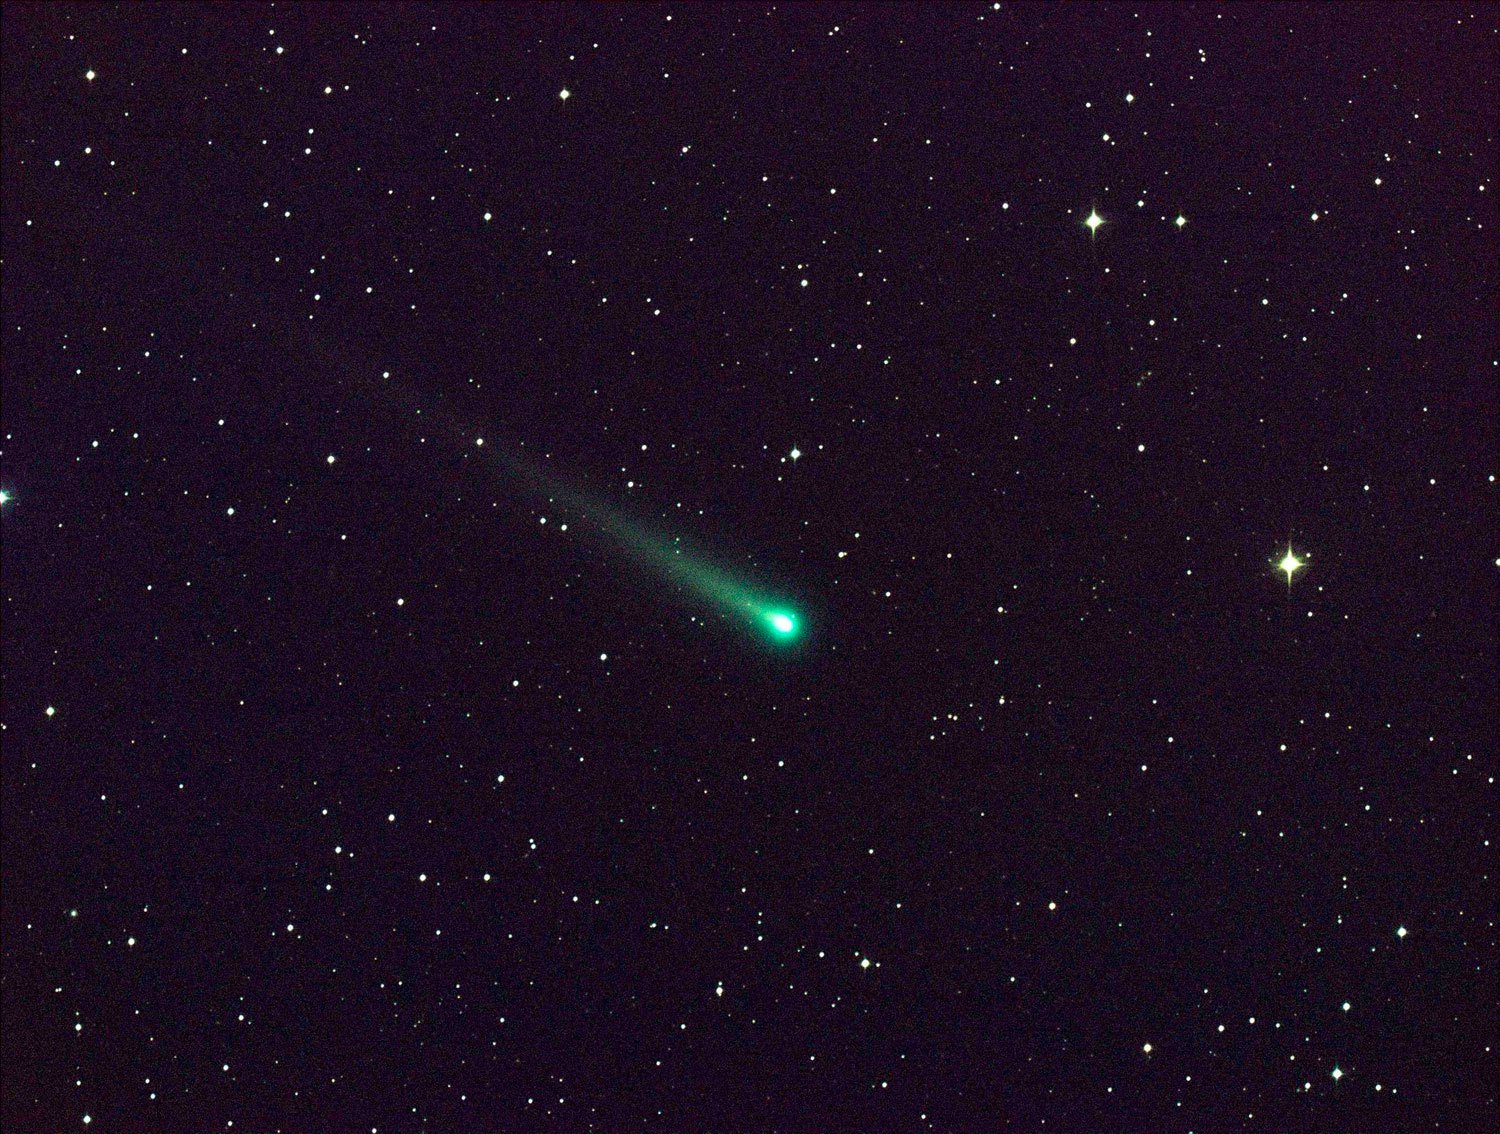 Comet ISON taken by NASA's Marshall Space Flight Center on Nov. 8 at 5:40 a.m. EST (1040 GMT). At the time of this picture, ISON was 97 million miles (156 million km) from Earth, heading toward a close encounter with the sun.